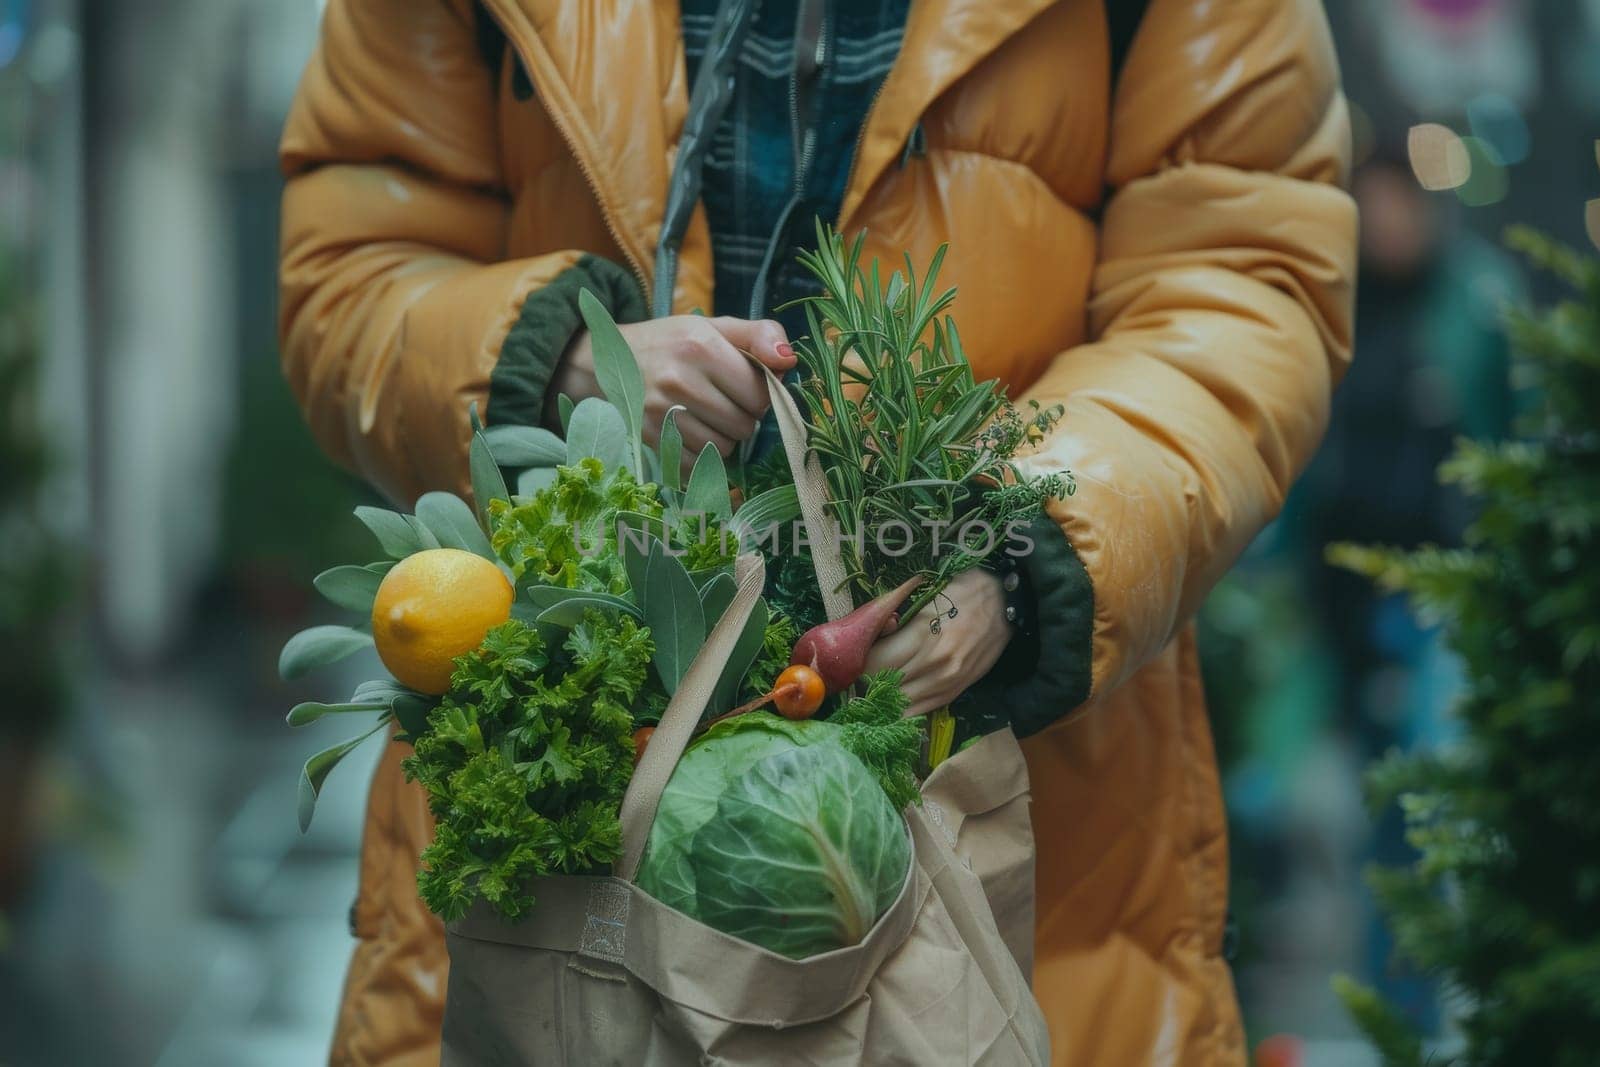 A person is holding a bag of vegetables, including carrots, broccoli, and celery. The bag is brown and the person is wearing a yellow jacket